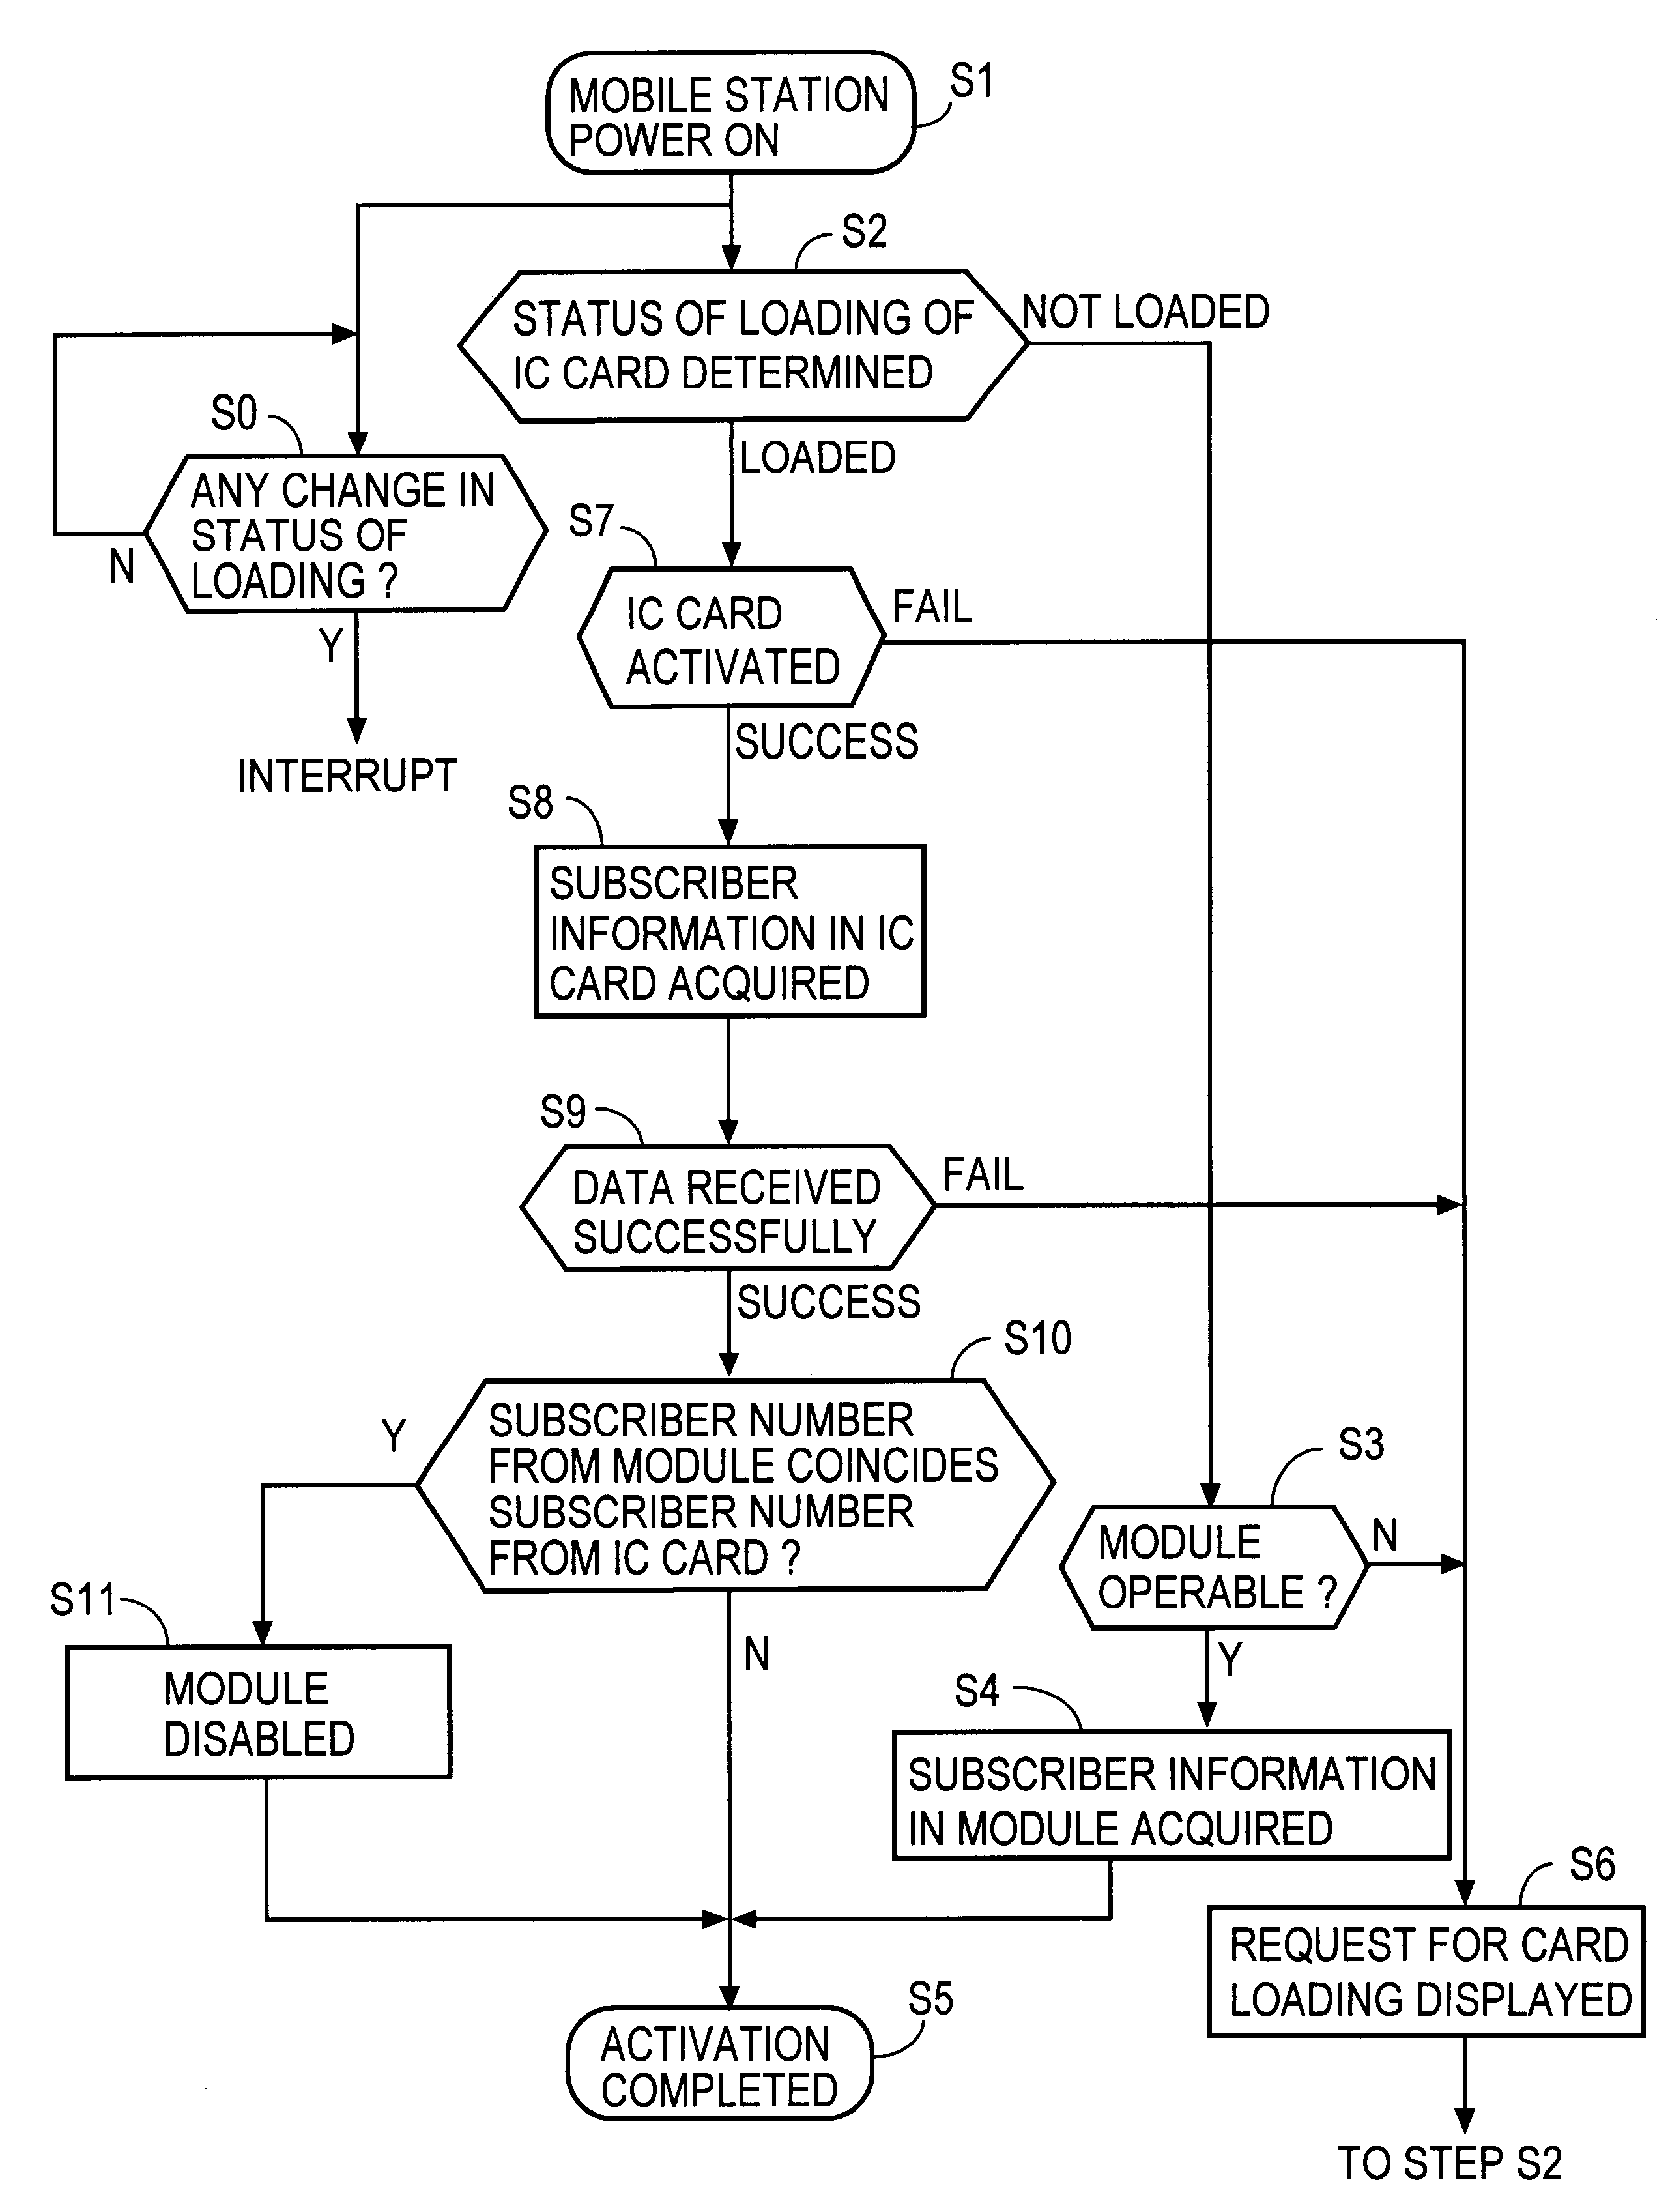 Method for controlling activation of mobile station, and mobile station using the method